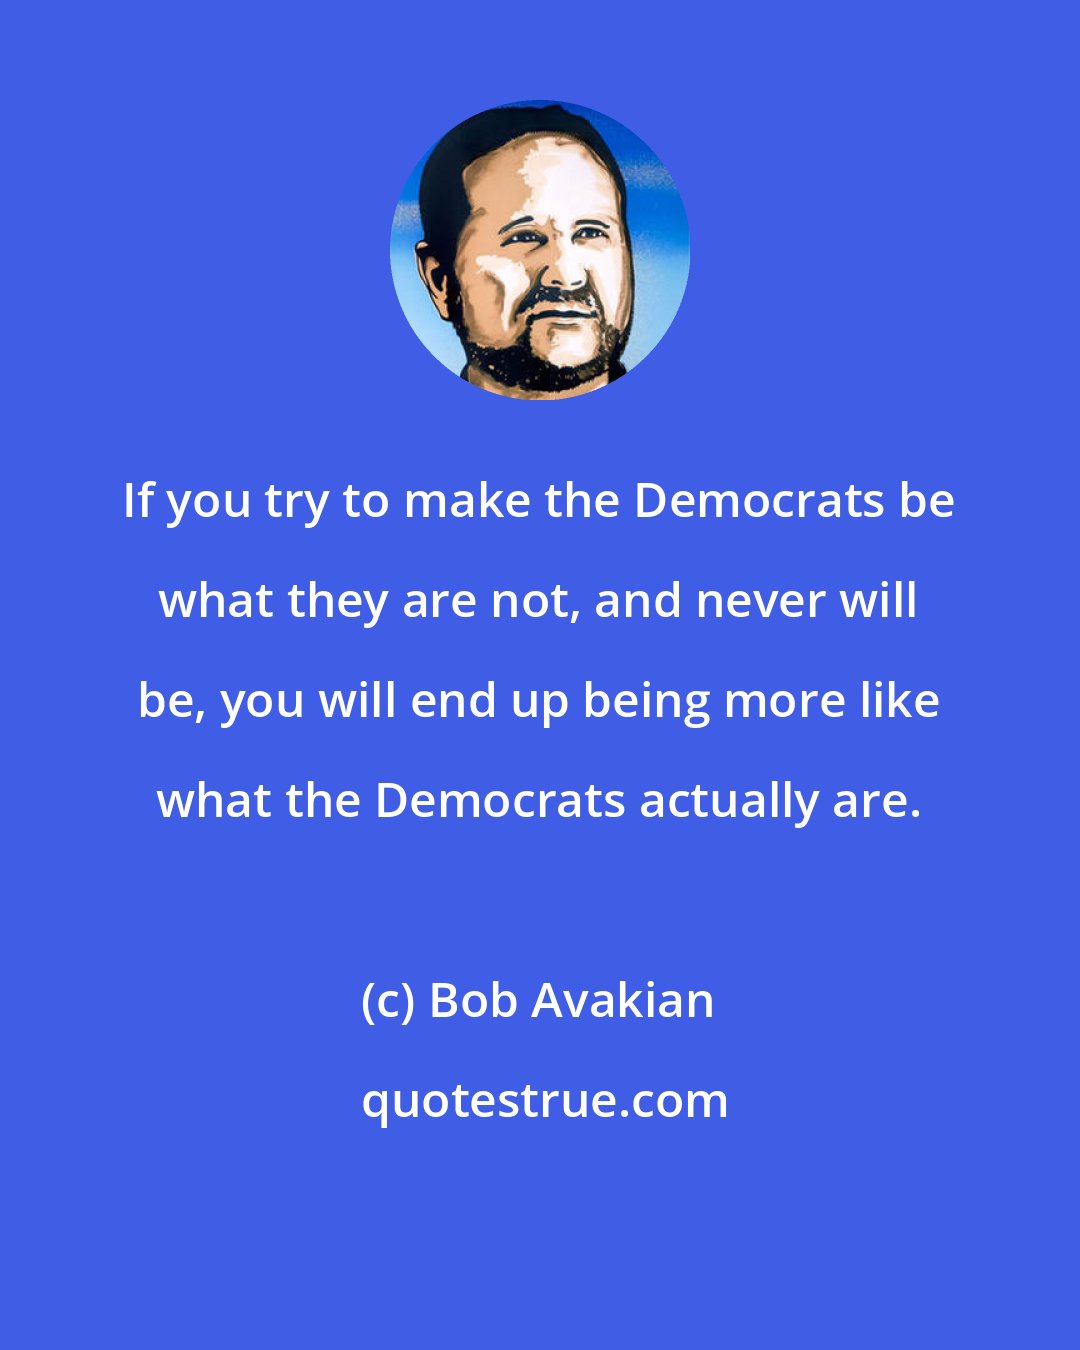 Bob Avakian: If you try to make the Democrats be what they are not, and never will be, you will end up being more like what the Democrats actually are.